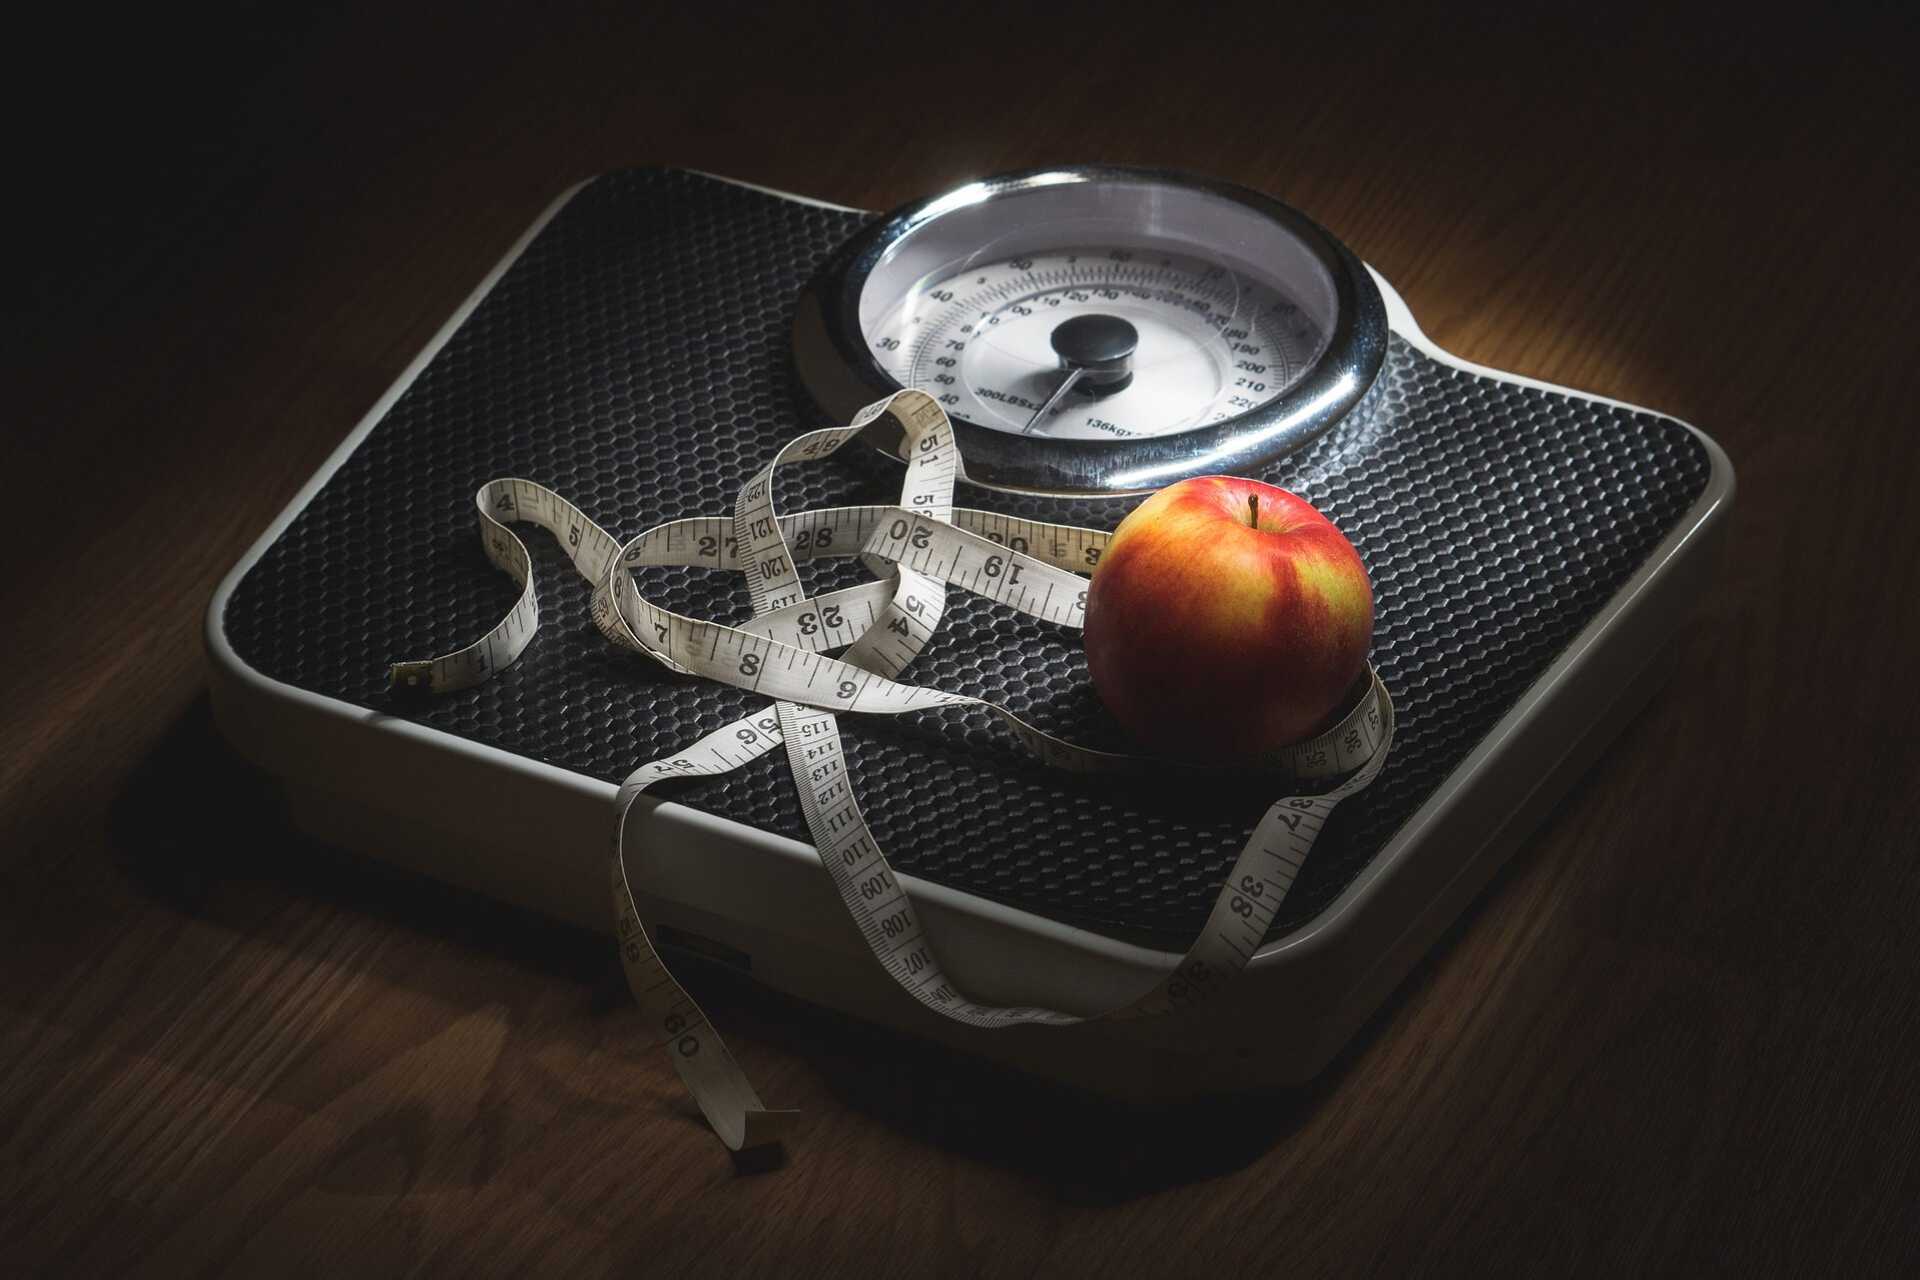 Weighing scales with measuring tape and apple